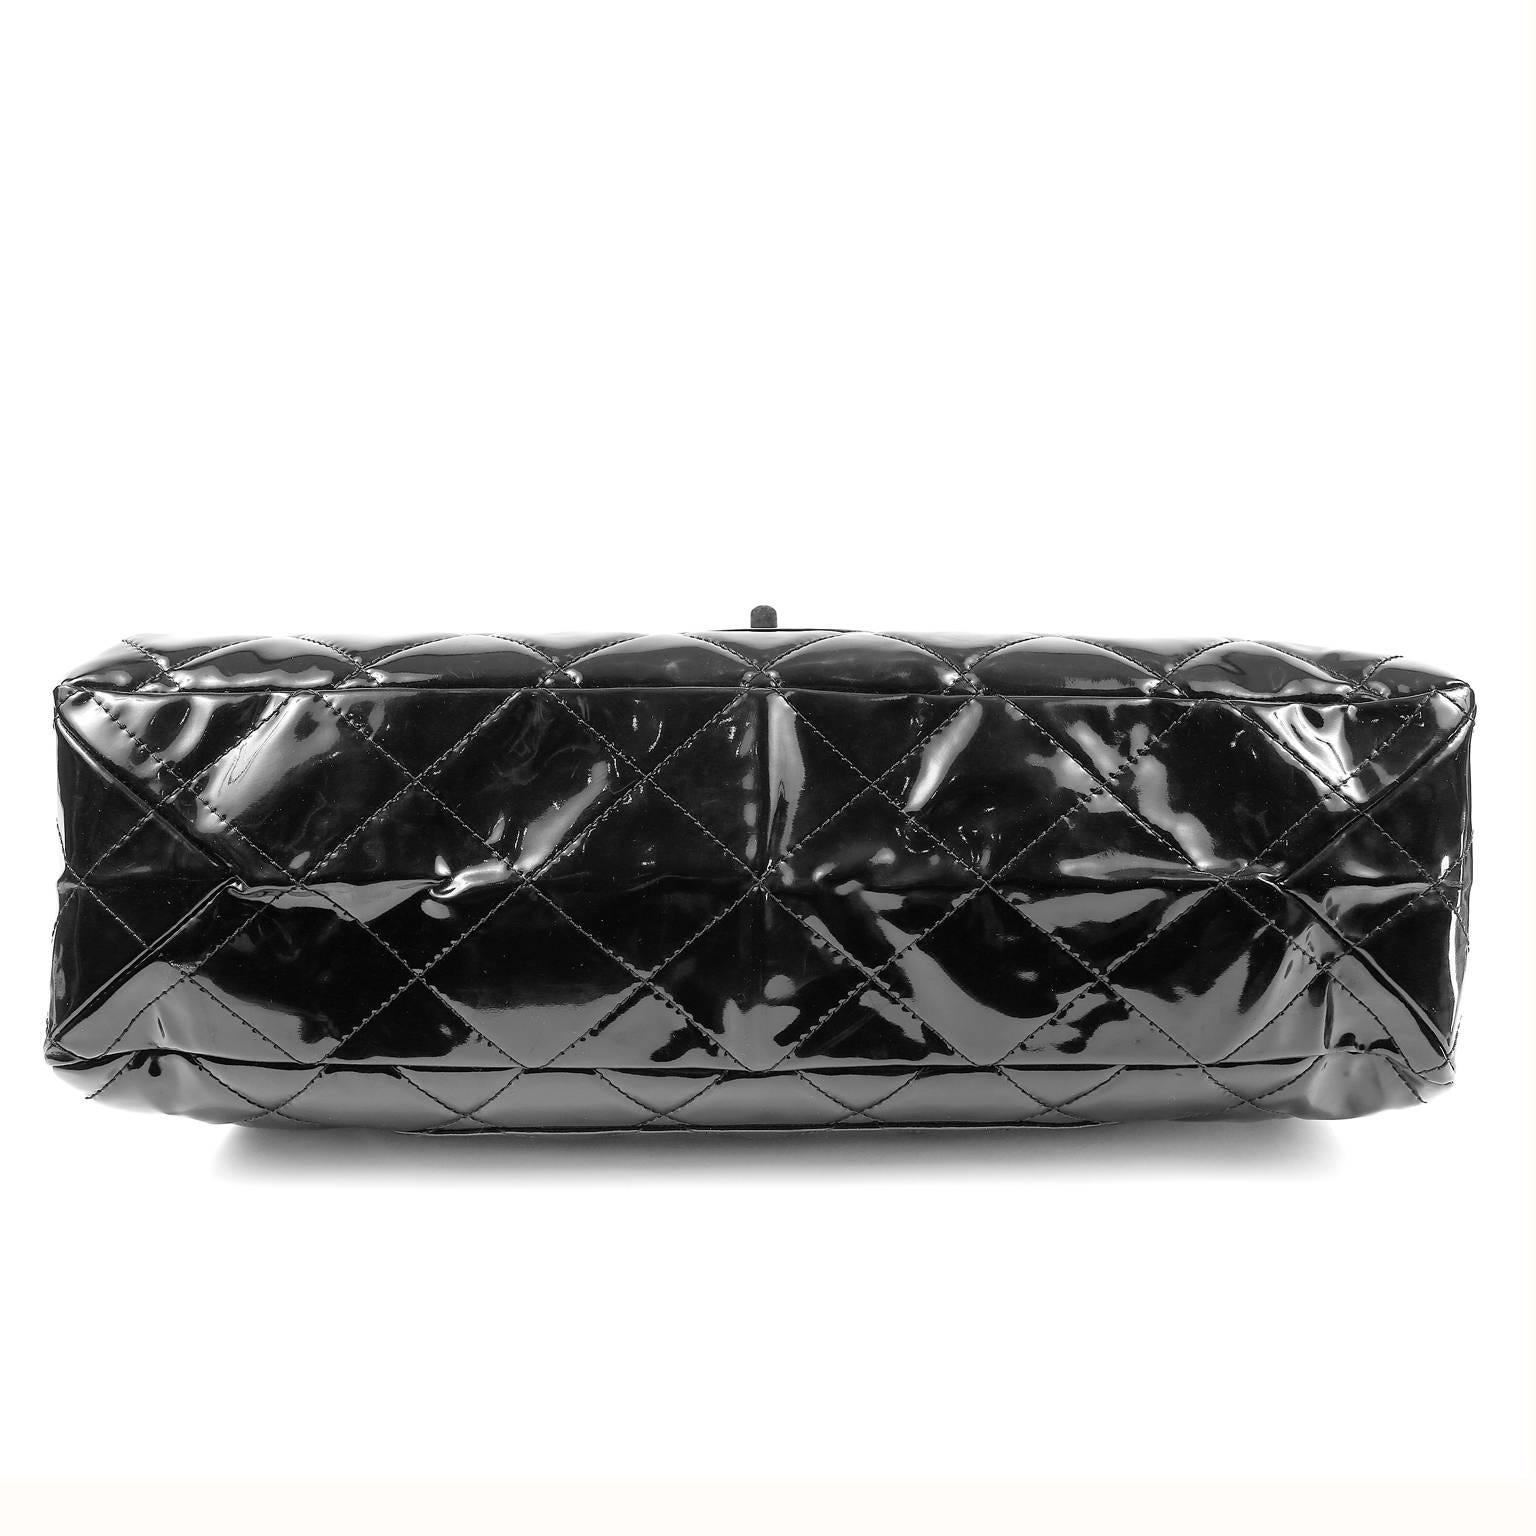 Women's Chanel Black Patent Leather XXL Reissue Bag For Sale